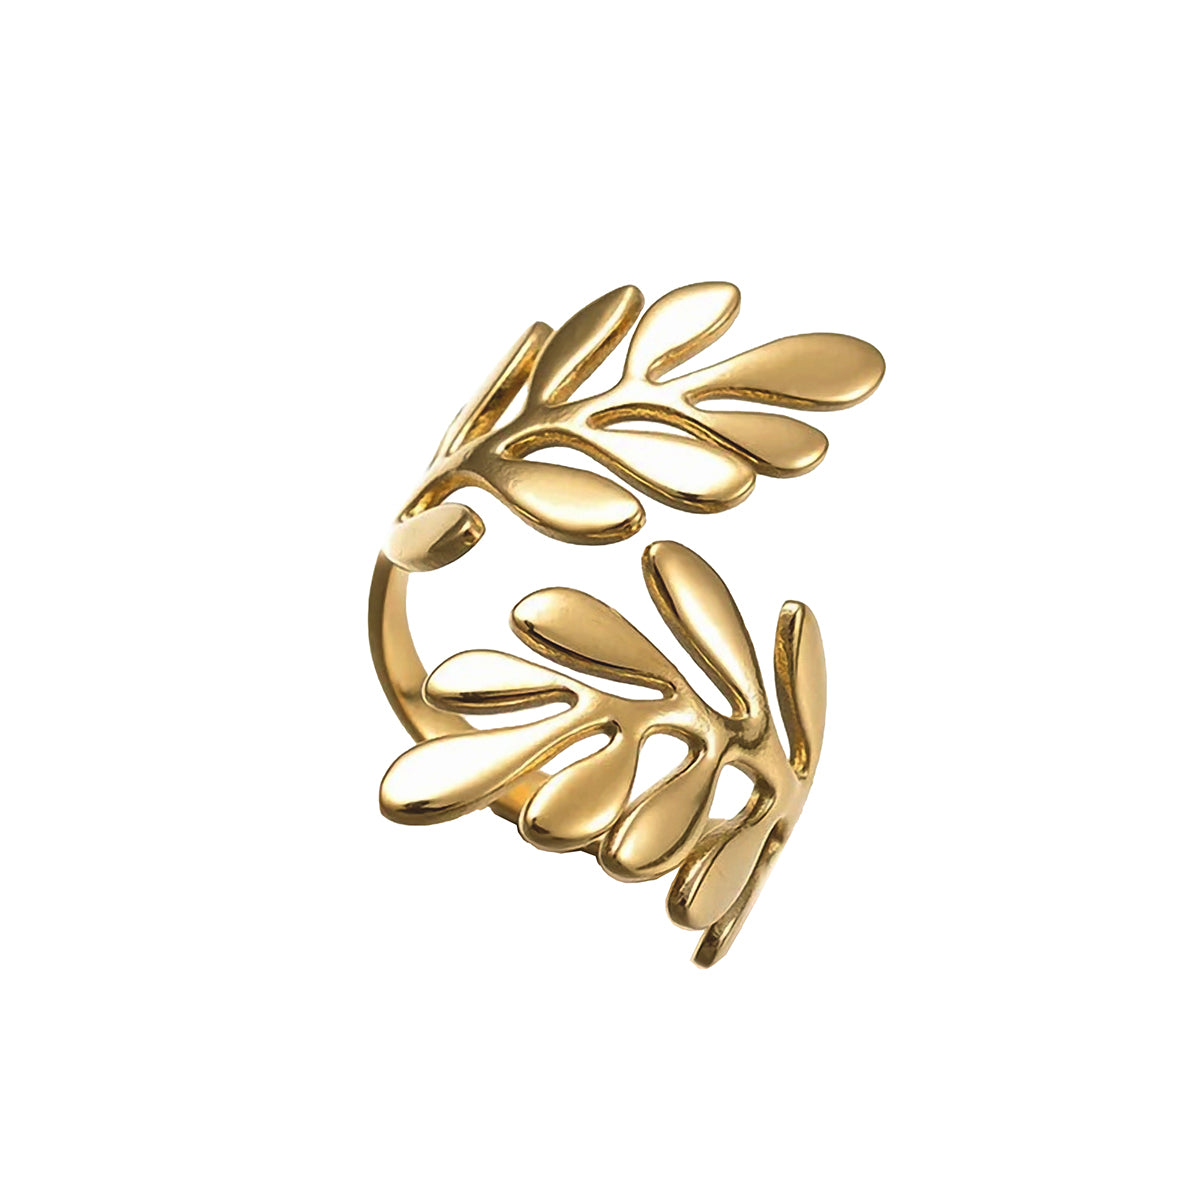 Intertwining branches ring single size steel ring (Steel 316L)